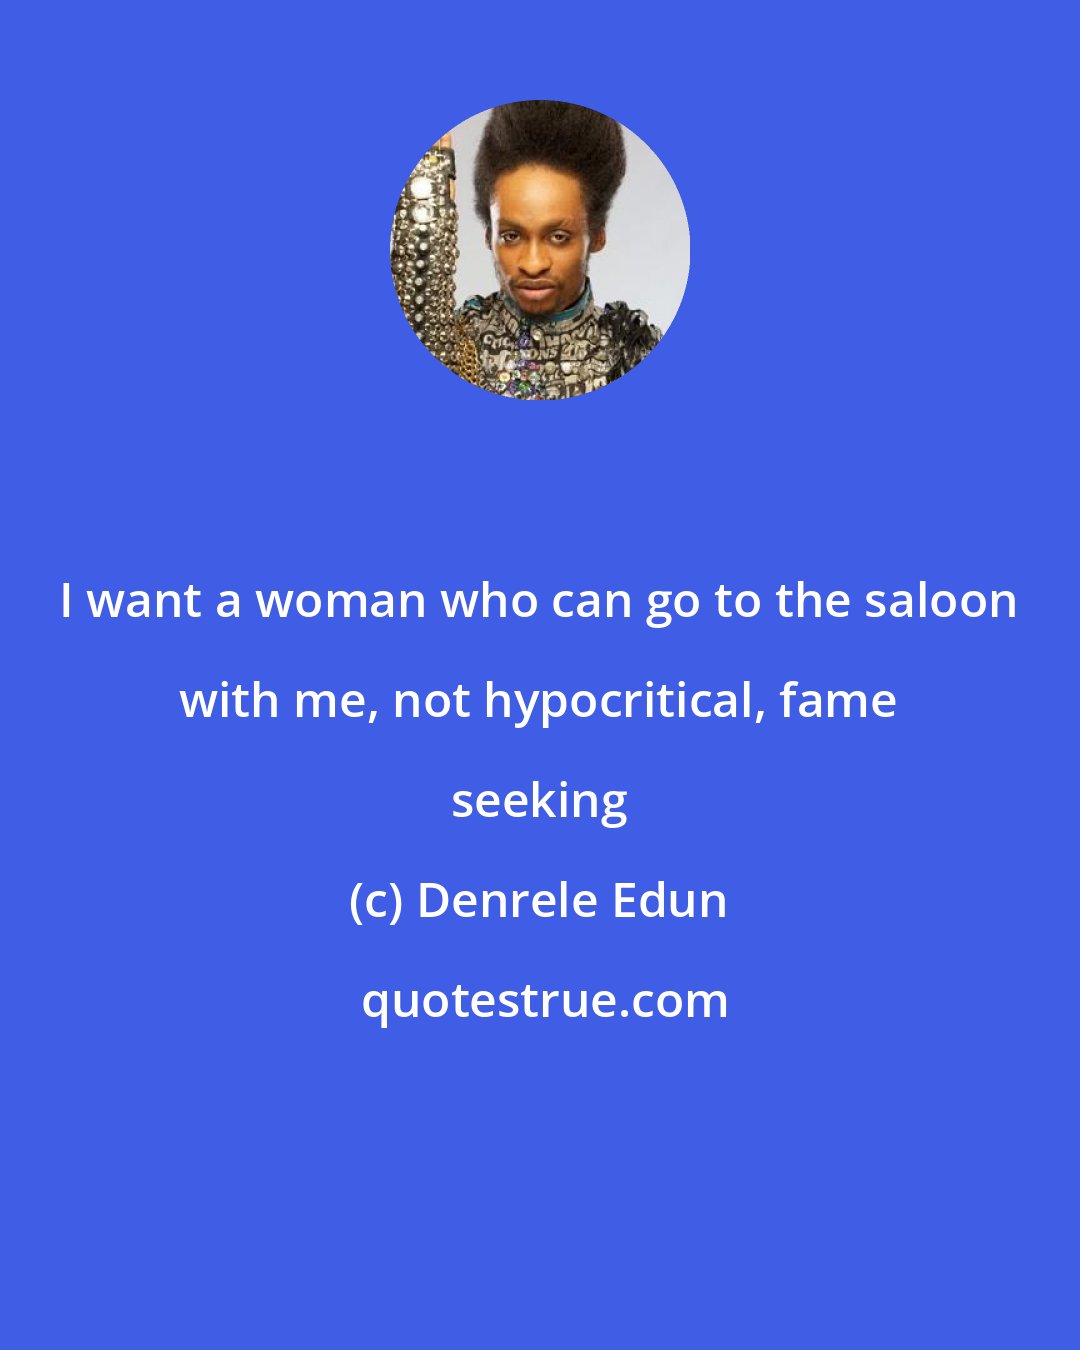 Denrele Edun: I want a woman who can go to the saloon with me, not hypocritical, fame seeking